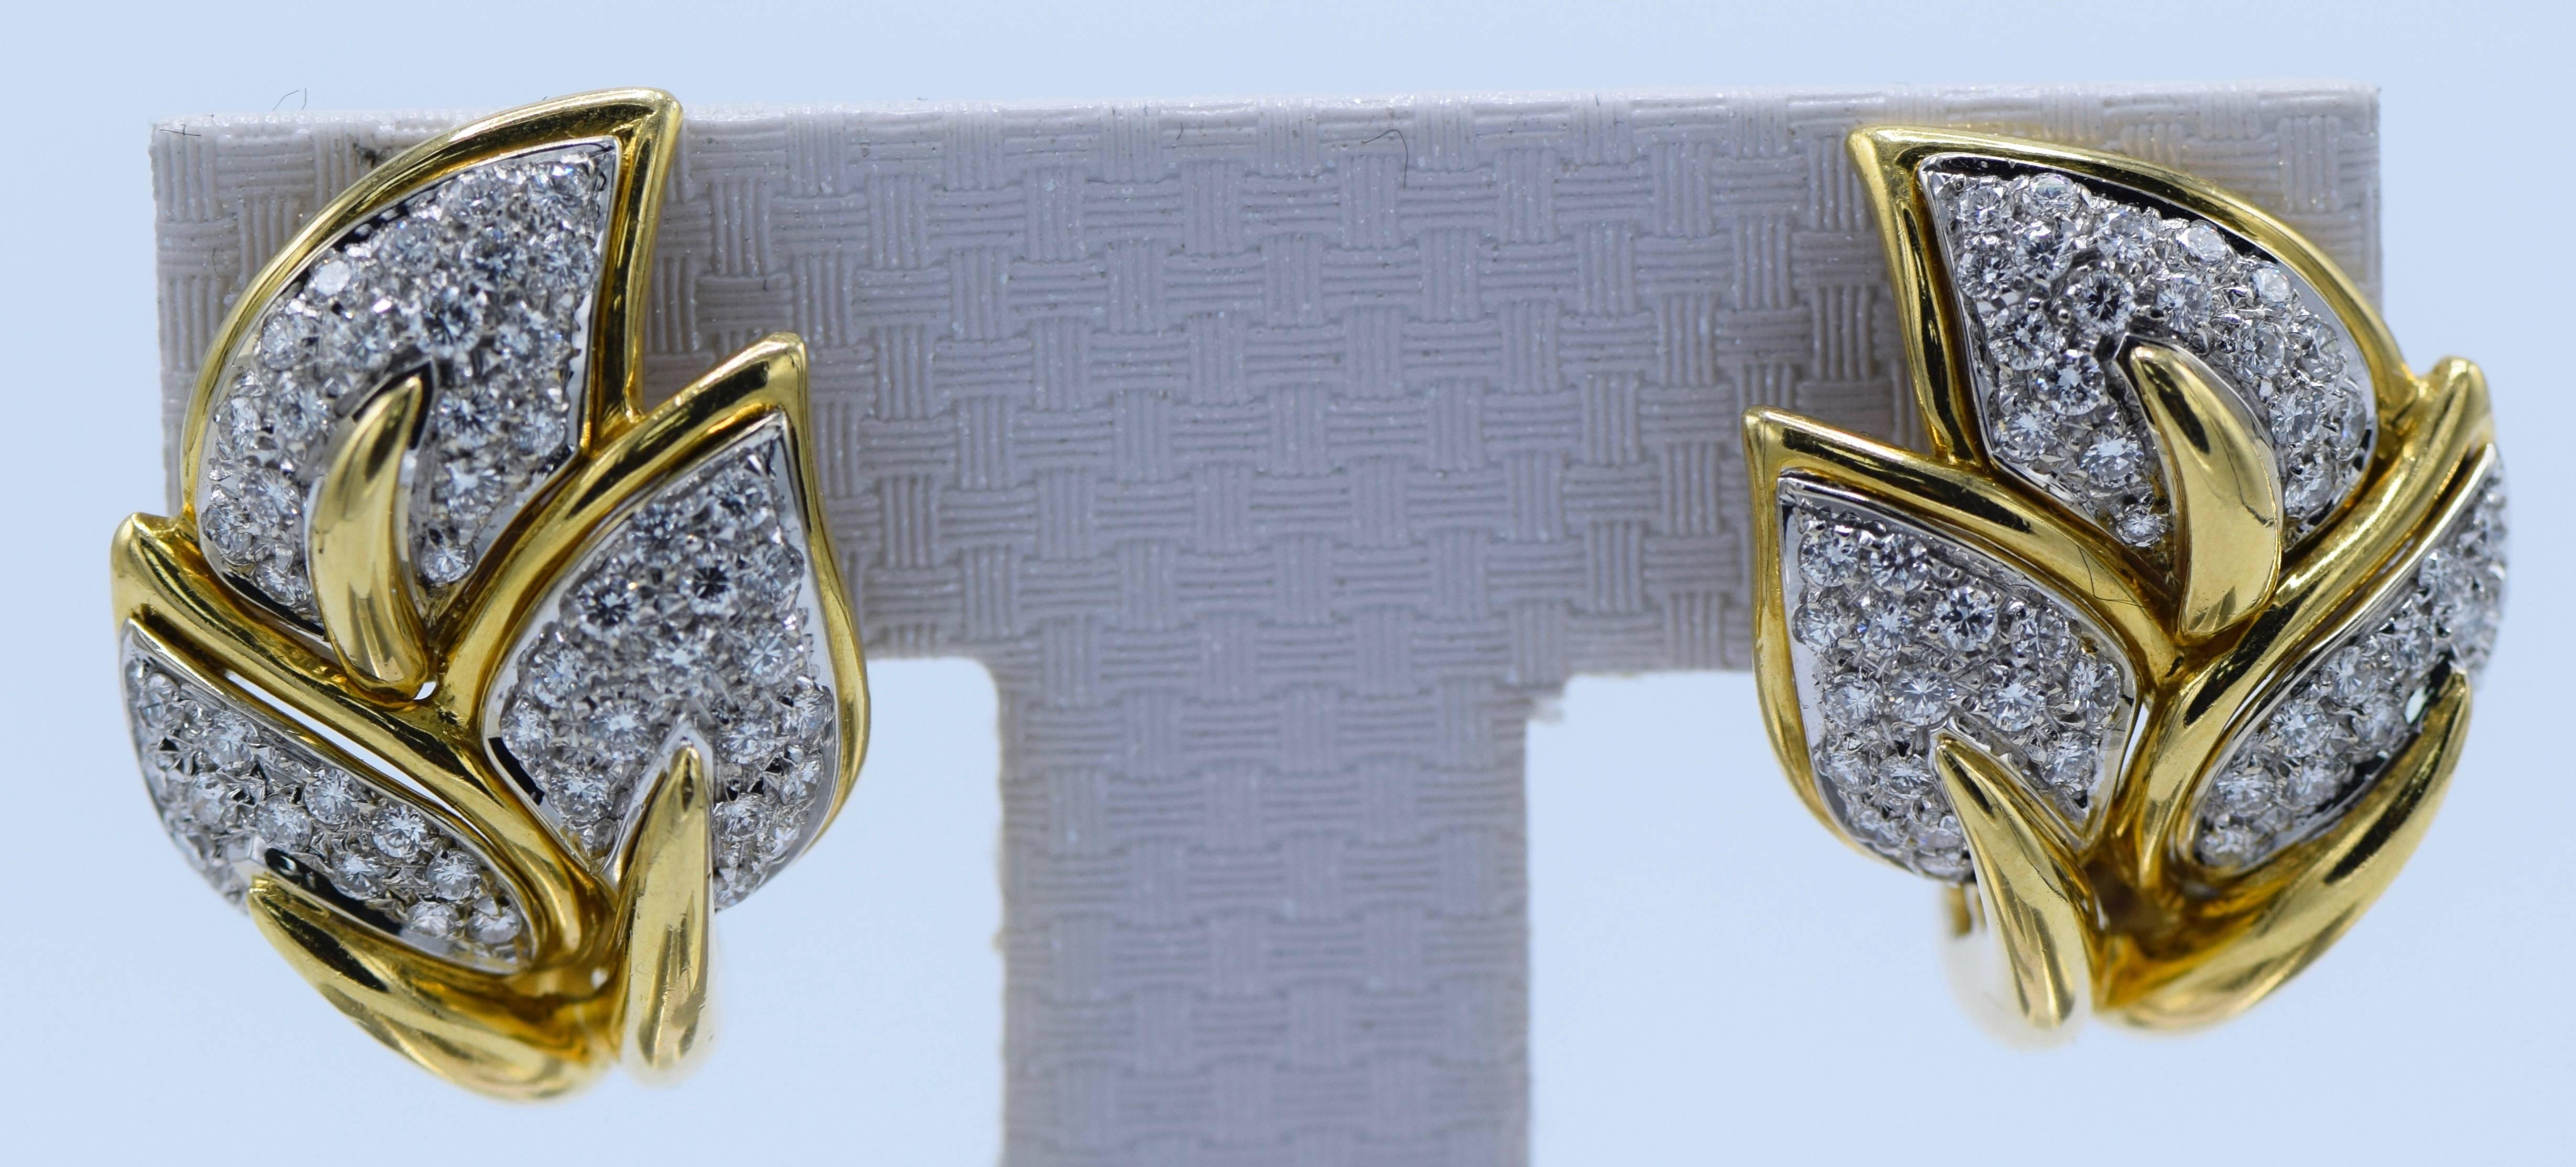 18 kt. yellow & white gold, 106 round diamonds ap. 2.10 cts., signed Italy, ap. 12.3 dwts.

Diamonds: F-G-VS. 

Posts & clip-backs. 1 x 3/4 inch. 
